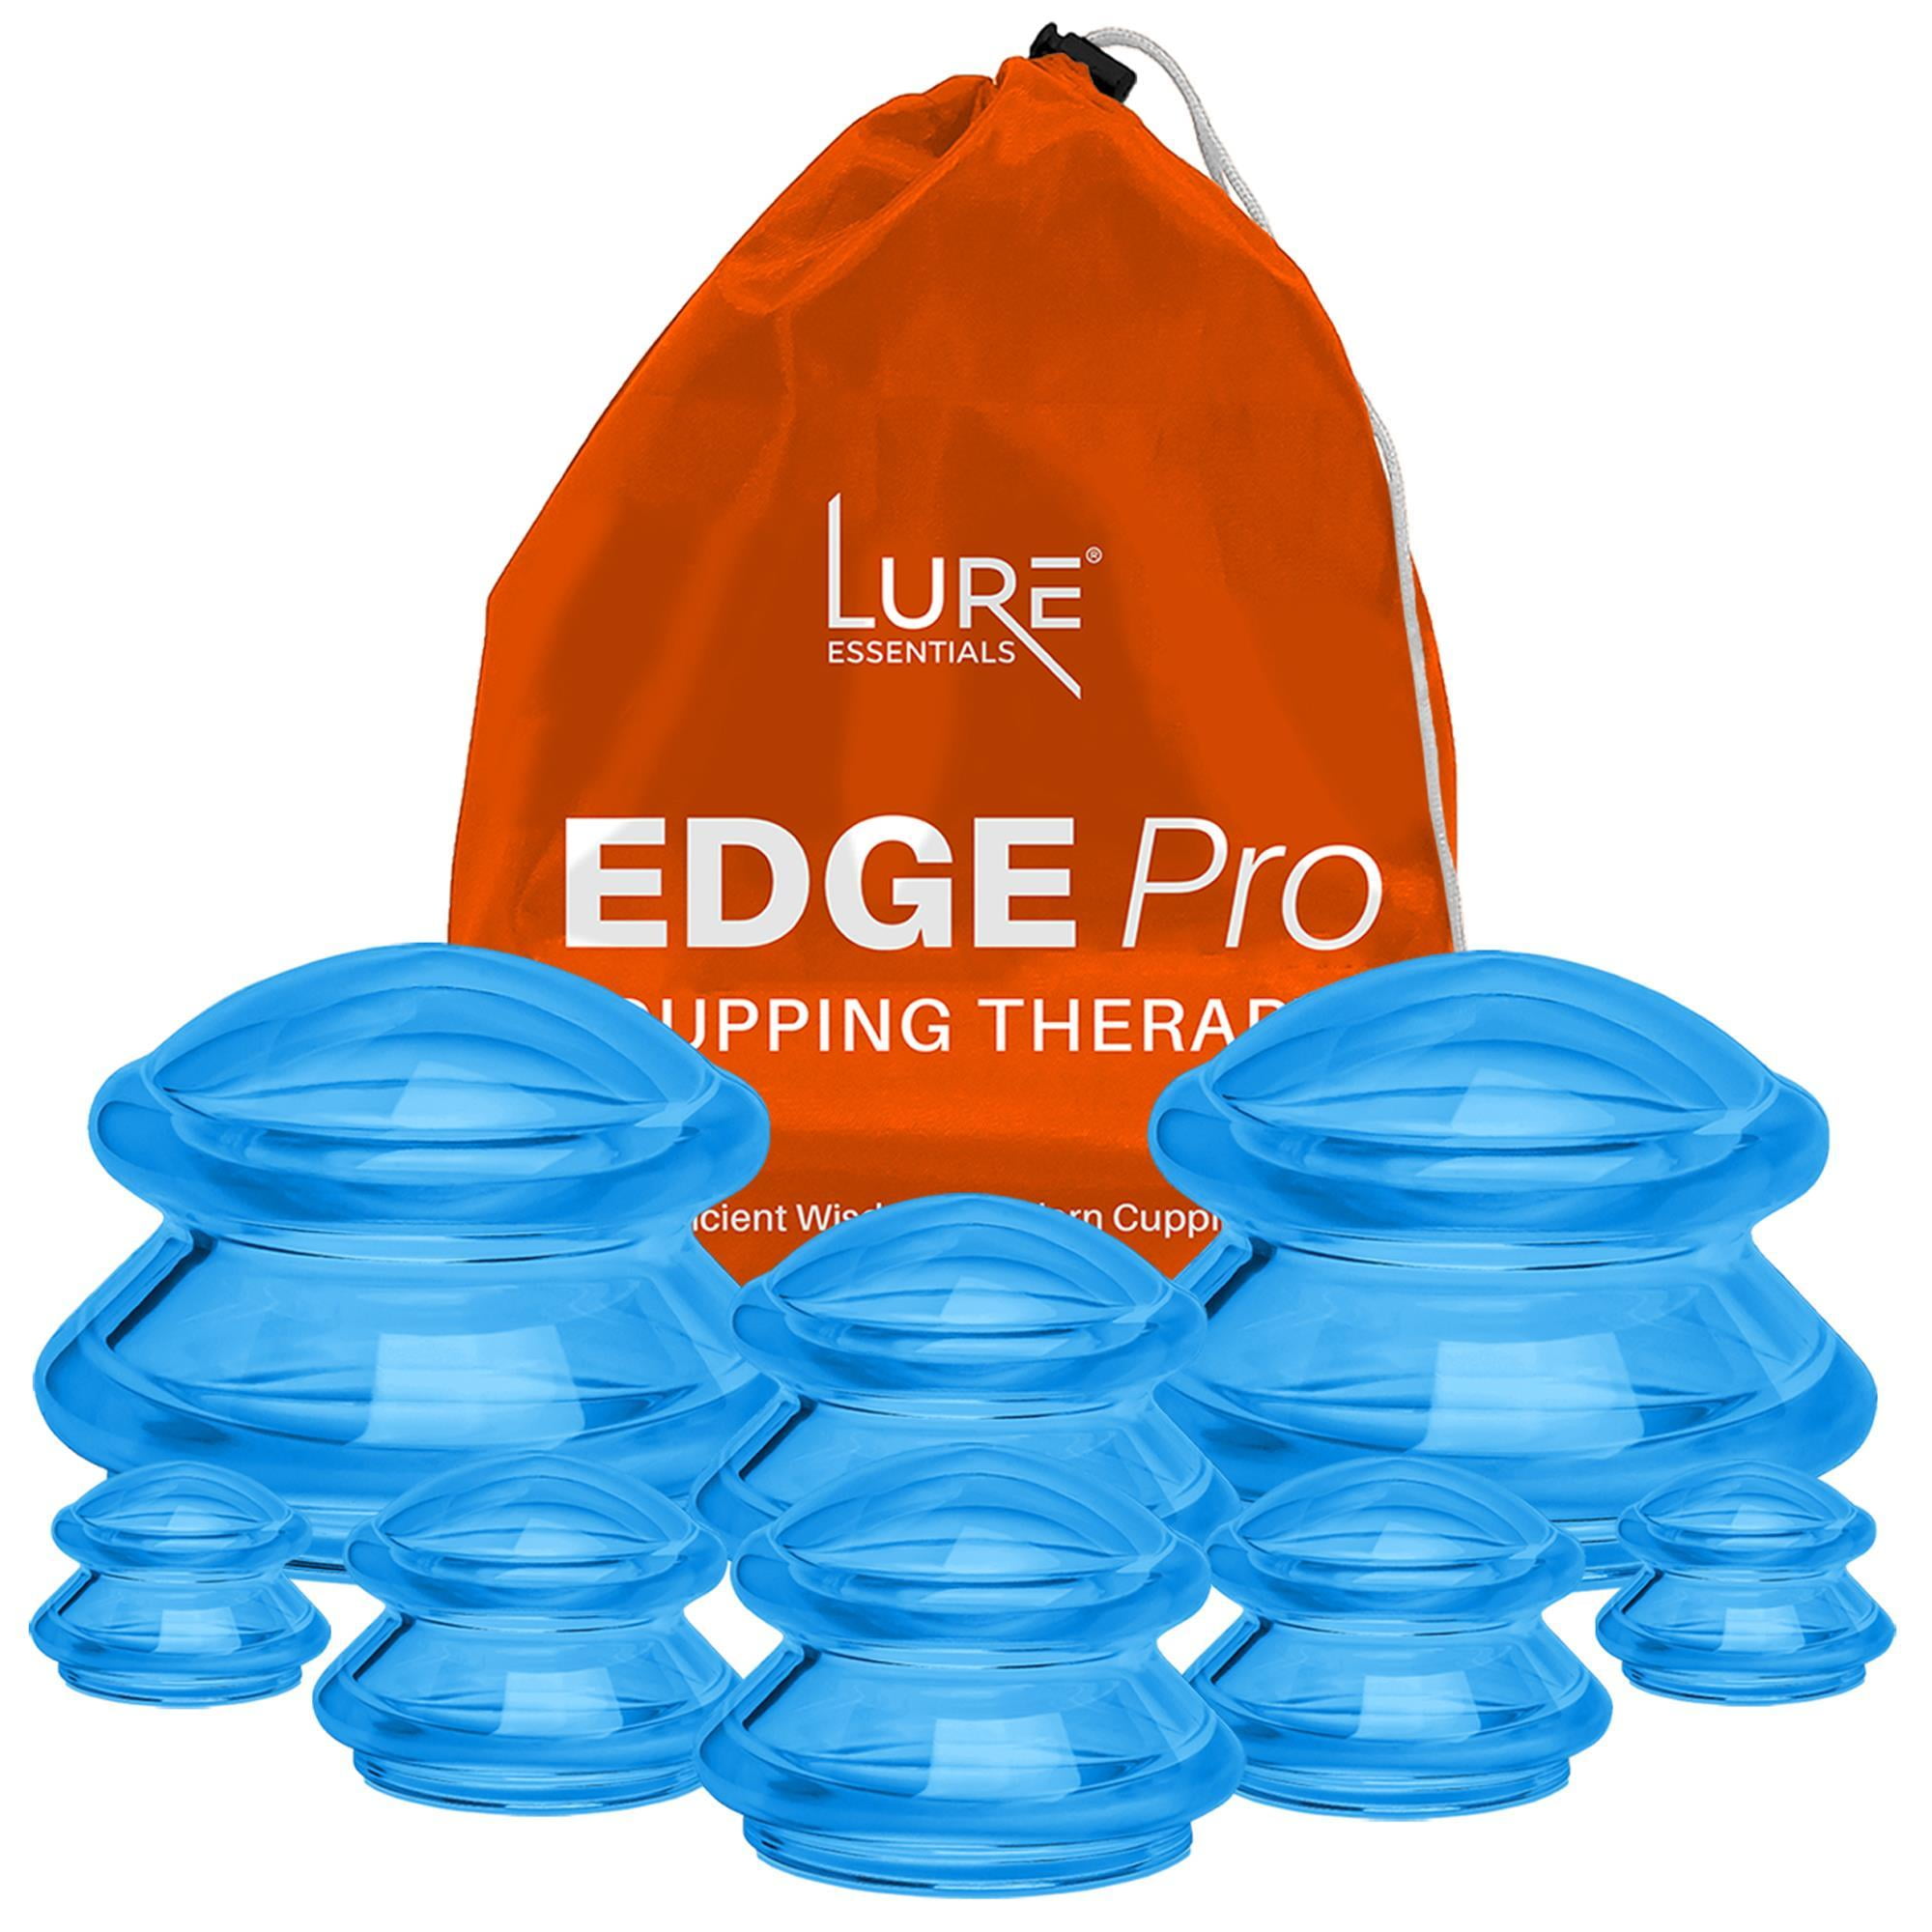 LURE Essentials Edge Cupping Set – Ultra Blue Silicone Cupping